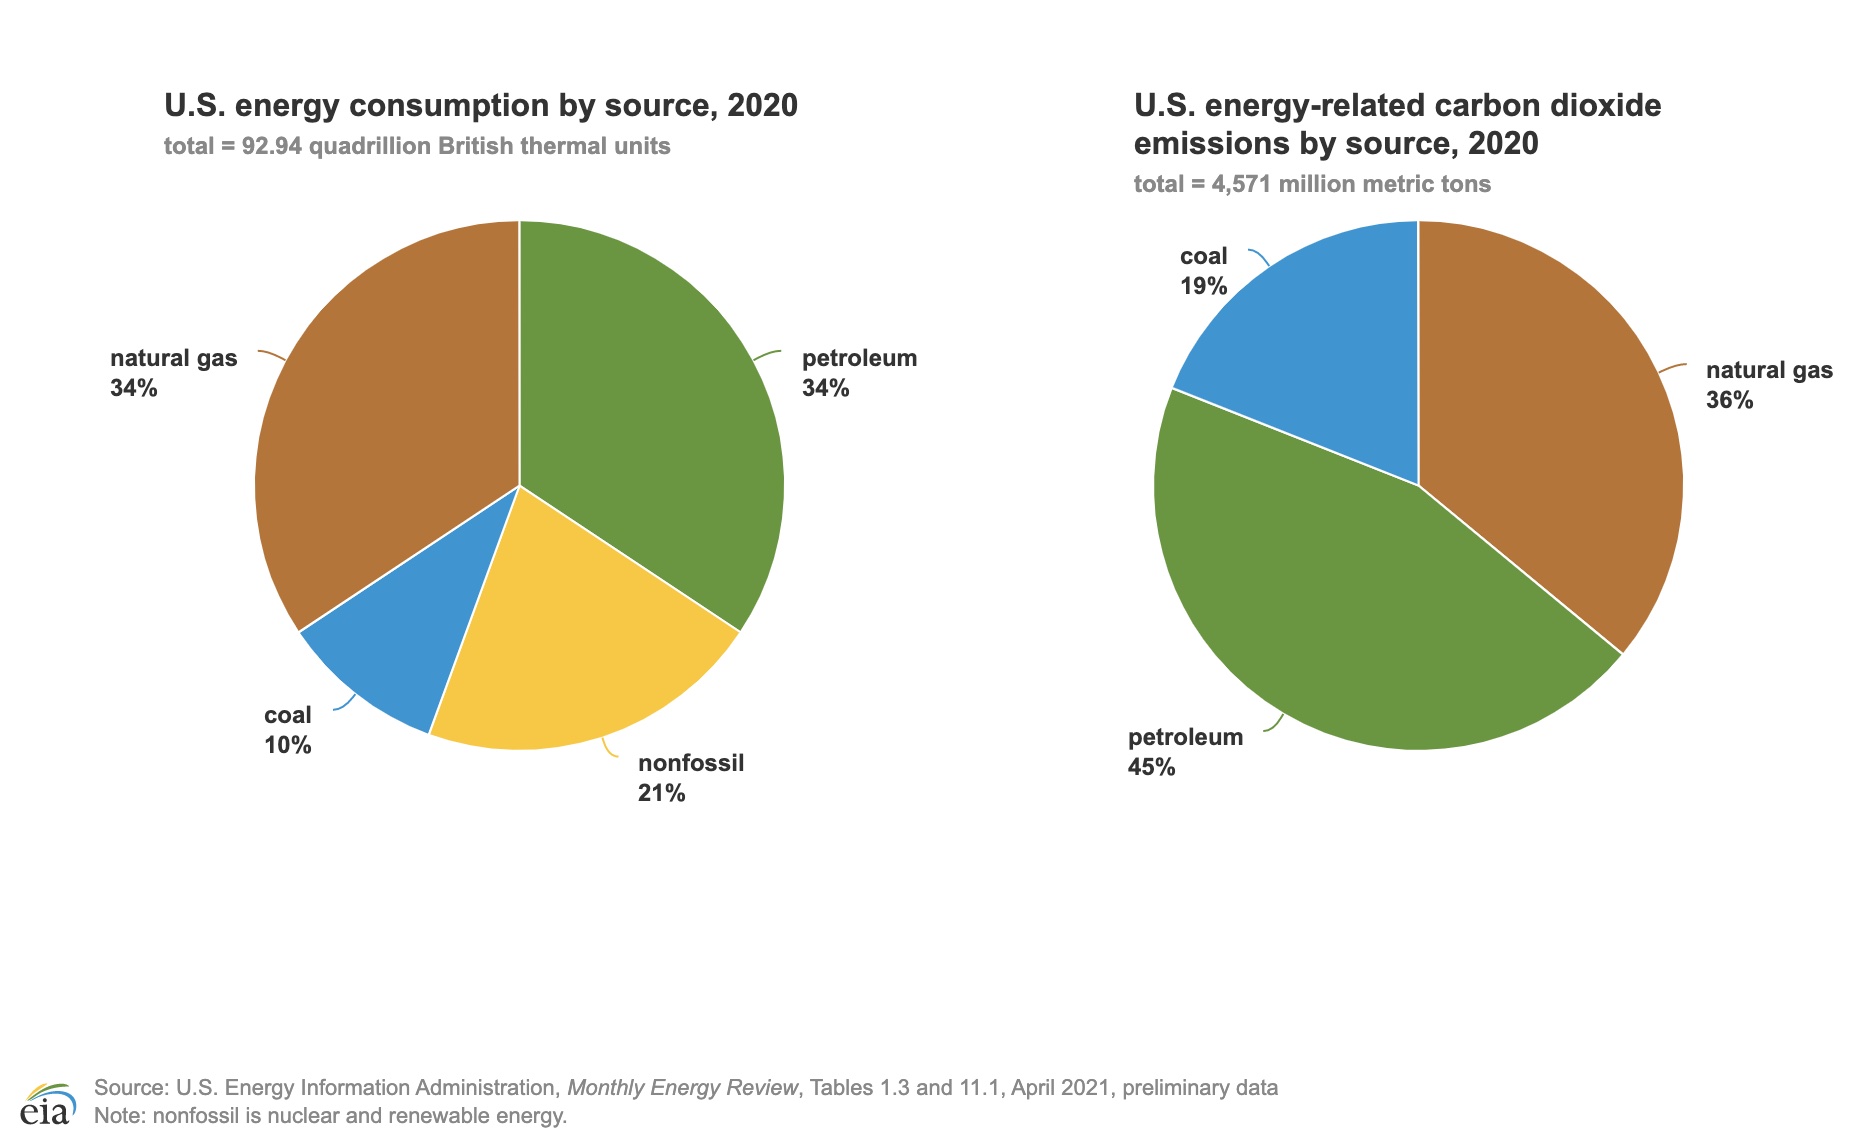 U.S. energy consumption by sources in 2020 and energy-related carbon dioxide emissions